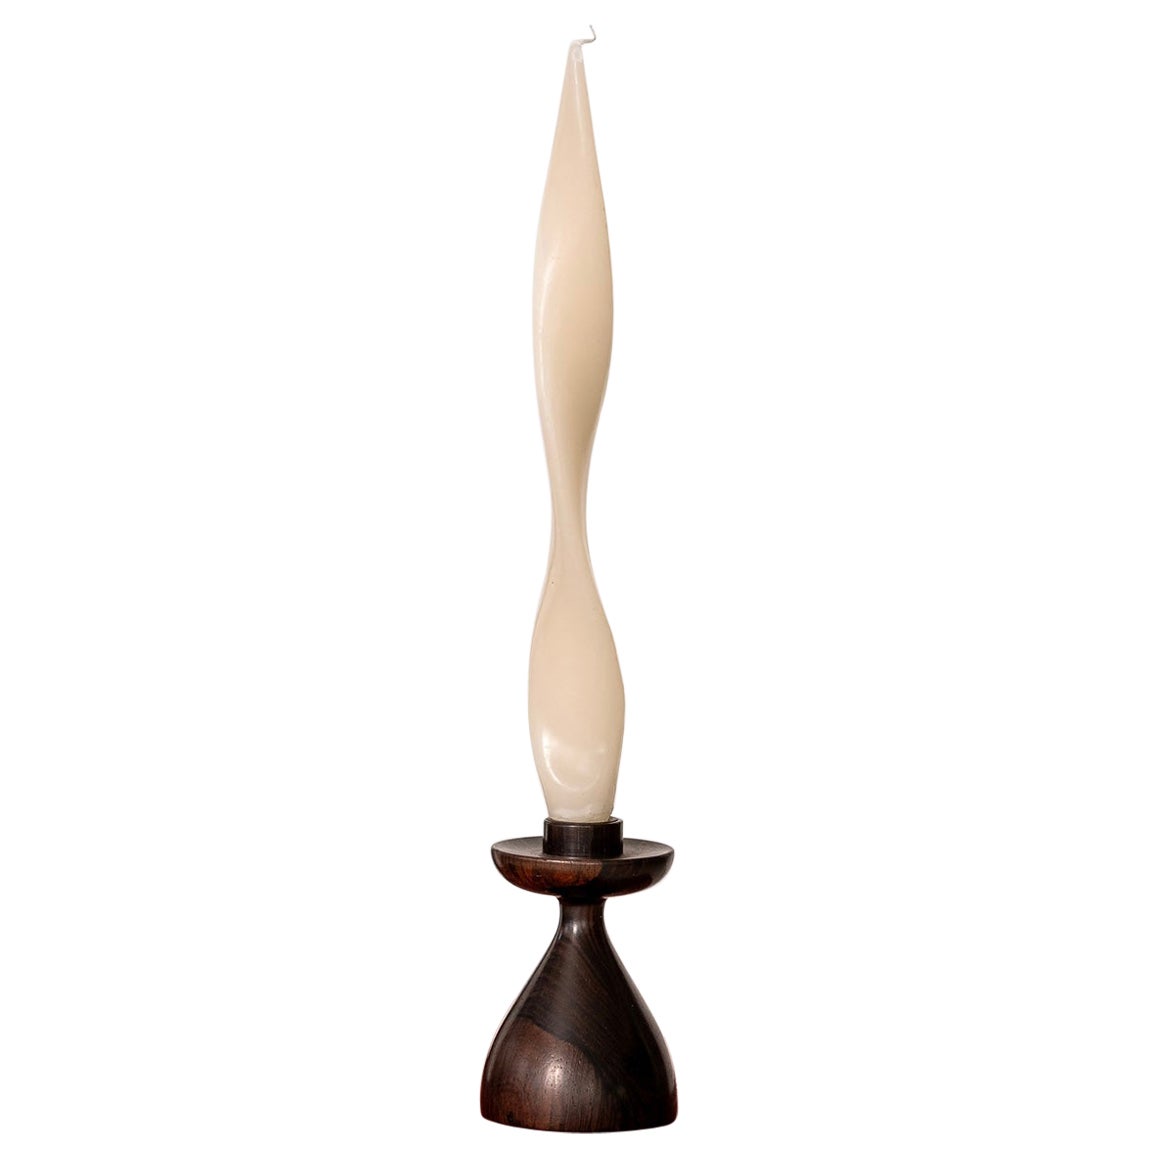 Brazilian Midcentury Candlestick in Rosewood by Casa Finland, c. 1970